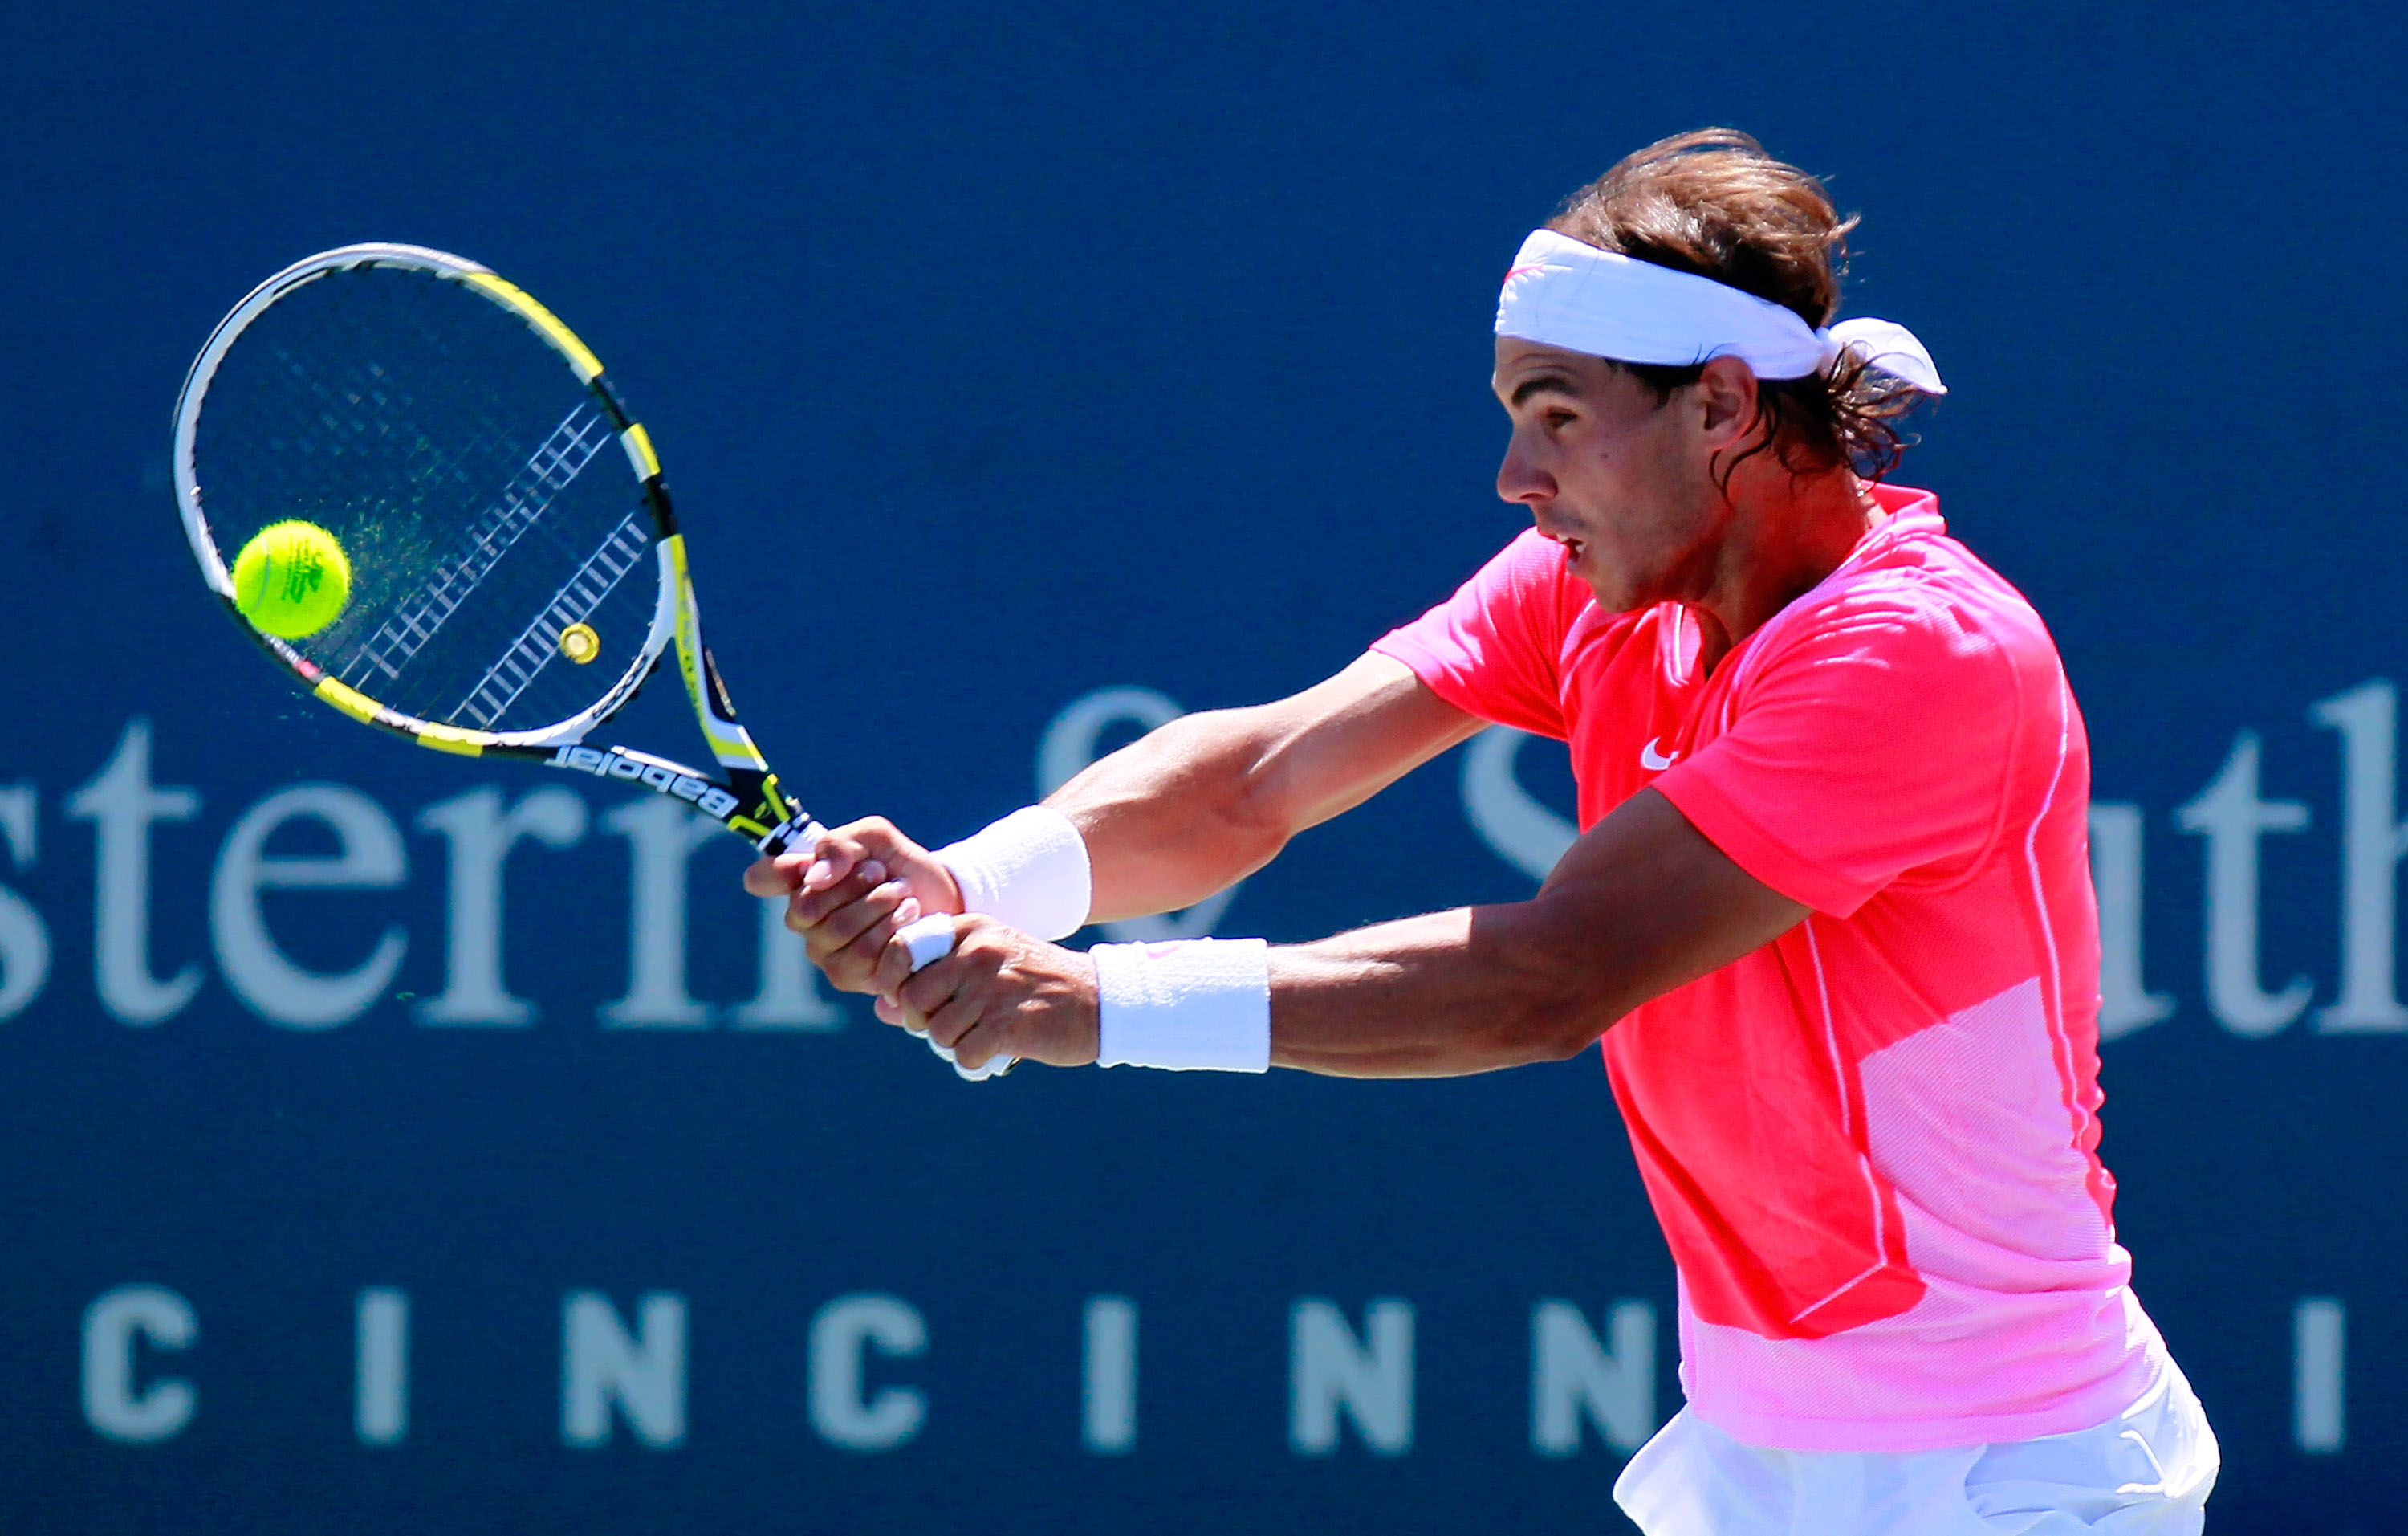 CINCINNATI - AUGUST 18:  Rafael Nadal of Spain returns a backlhand to Taylor Dent during Day 3 of the Western & Southern Financial Group Masters at the Lindner Family Tennis Center on August 18, 2010 in Cincinnati, Ohio.  (Photo by Kevin C. Cox/Getty Imag